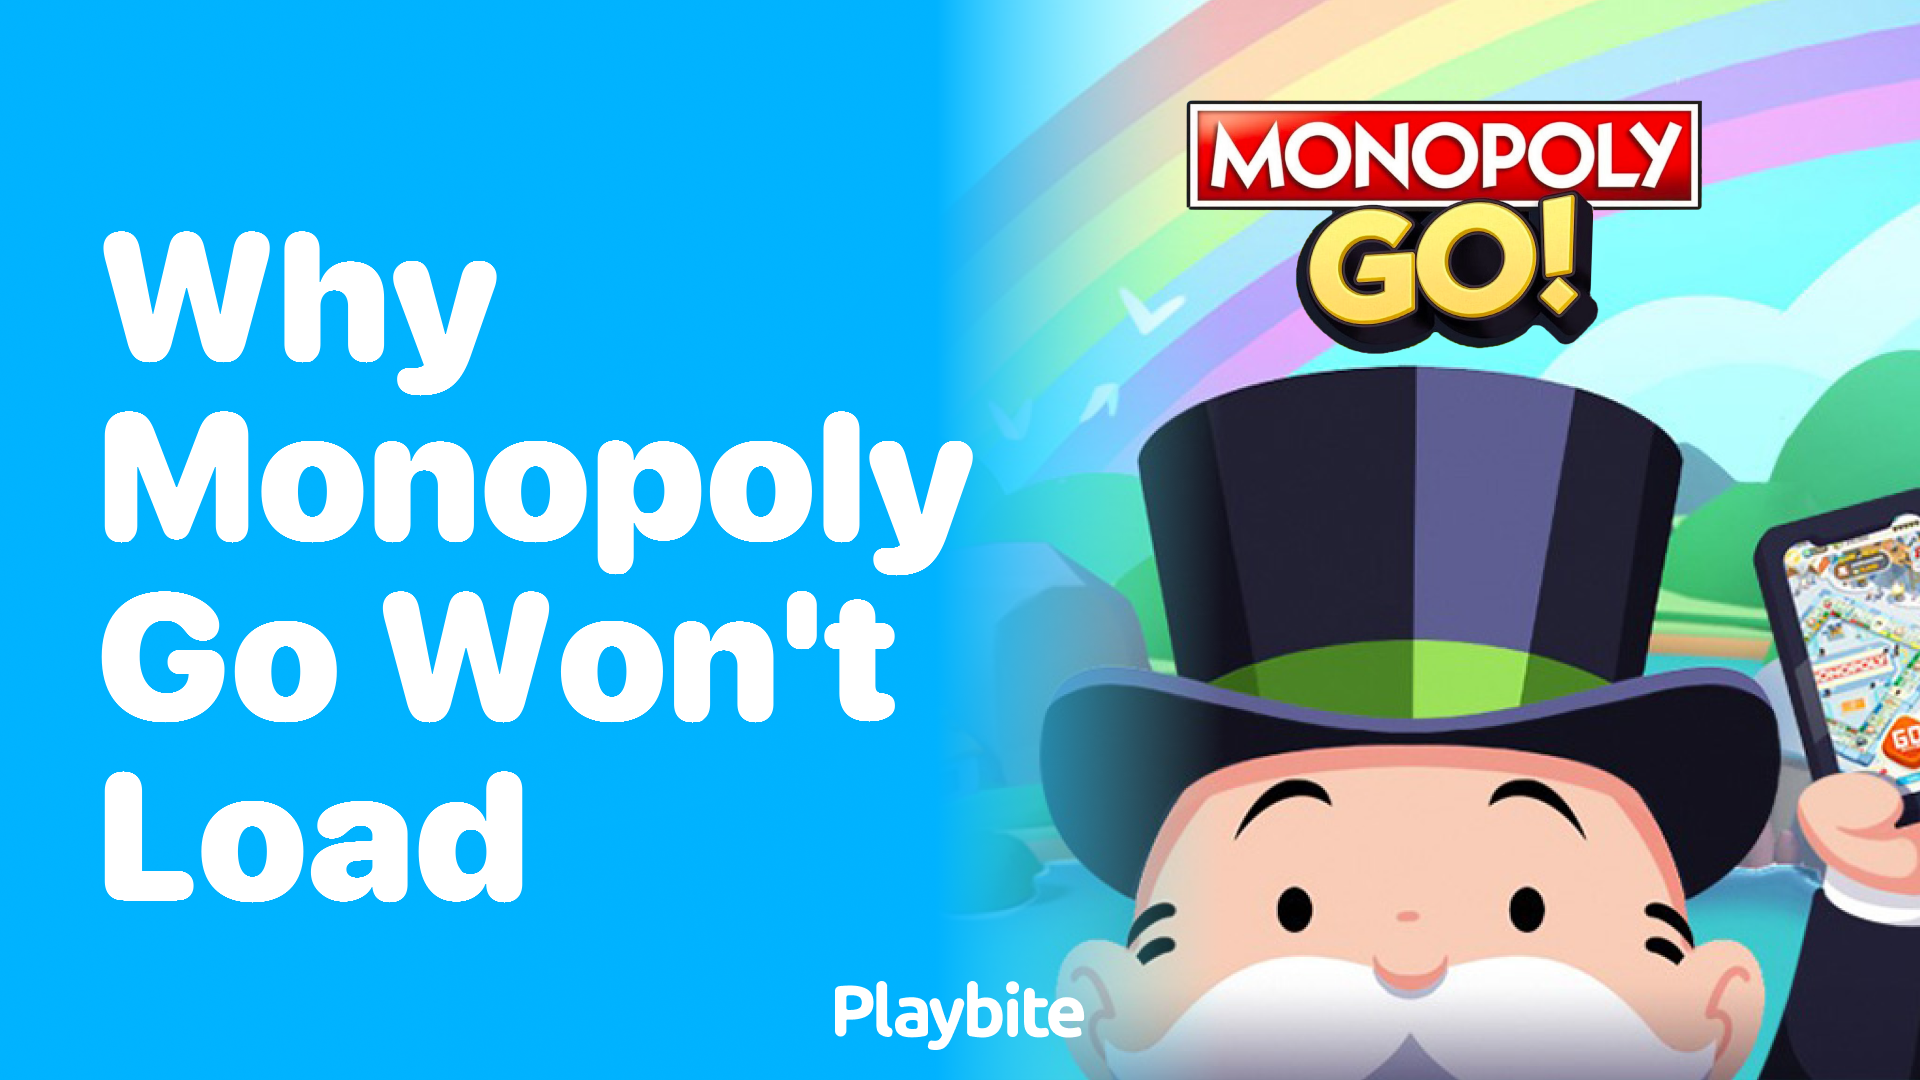 Why won&#8217;t Monopoly Go load? Solutions inside!